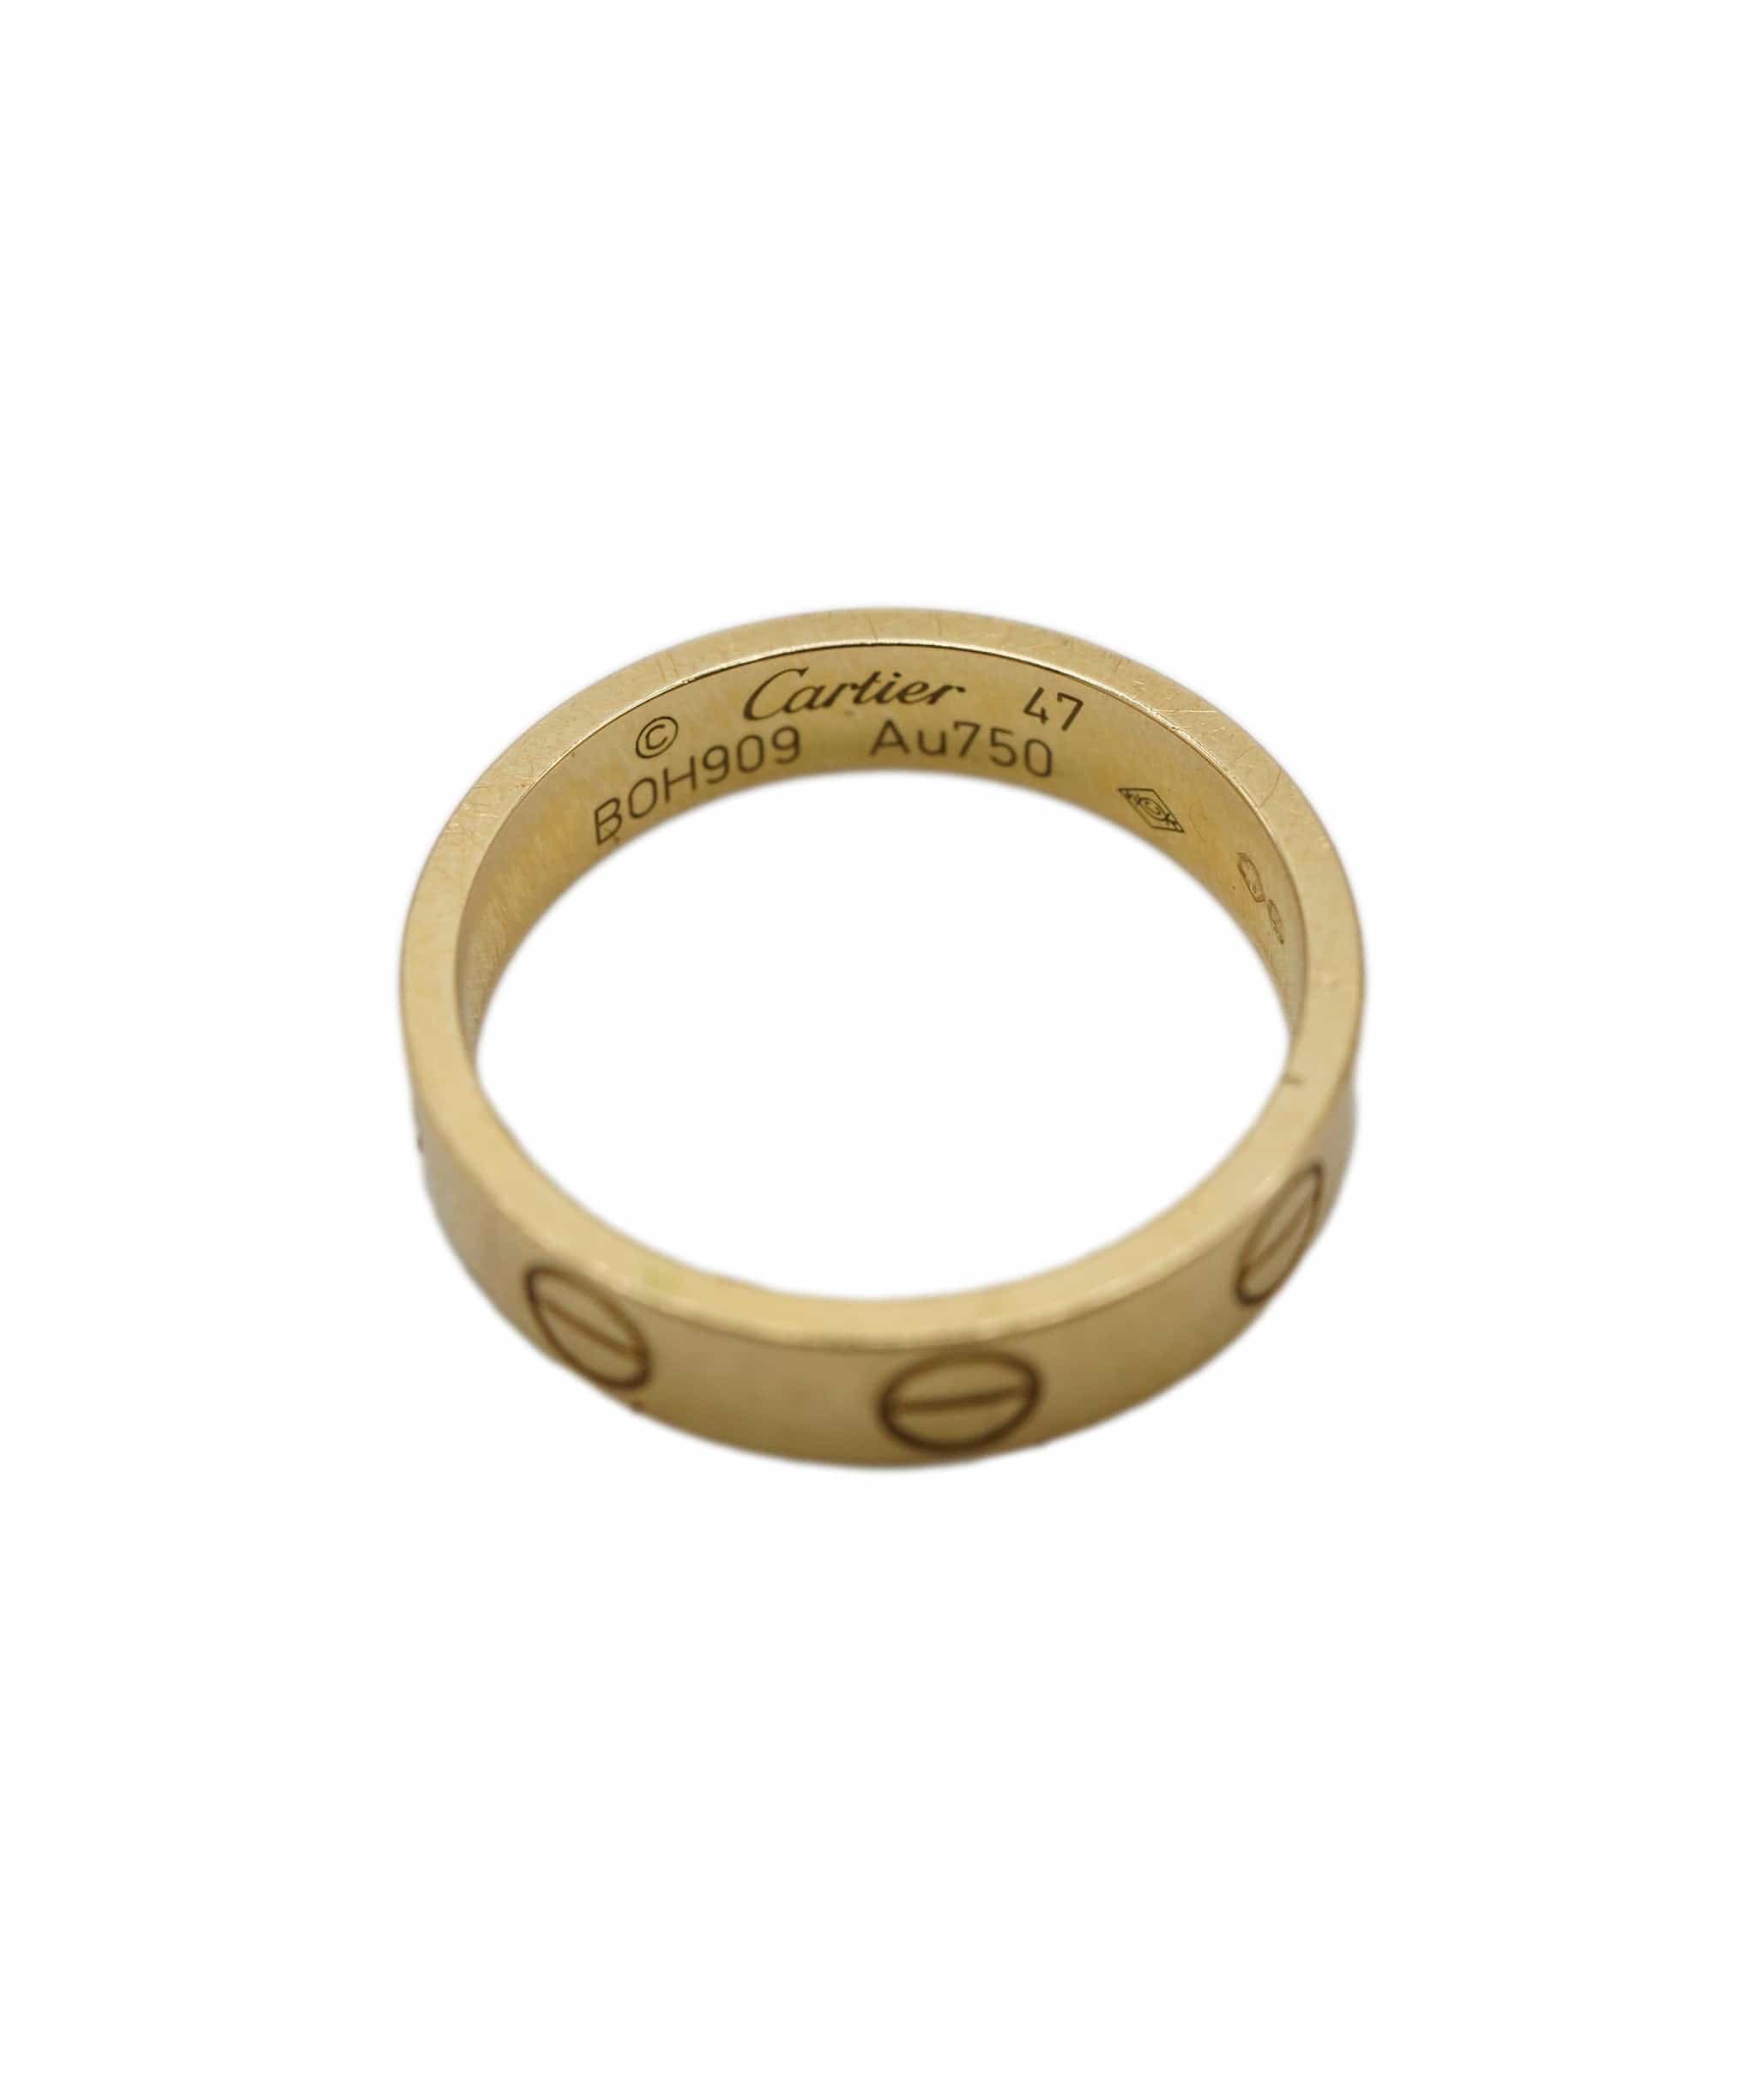 Cartier Cartier love band ring thin yellow gold 47 - lot8A